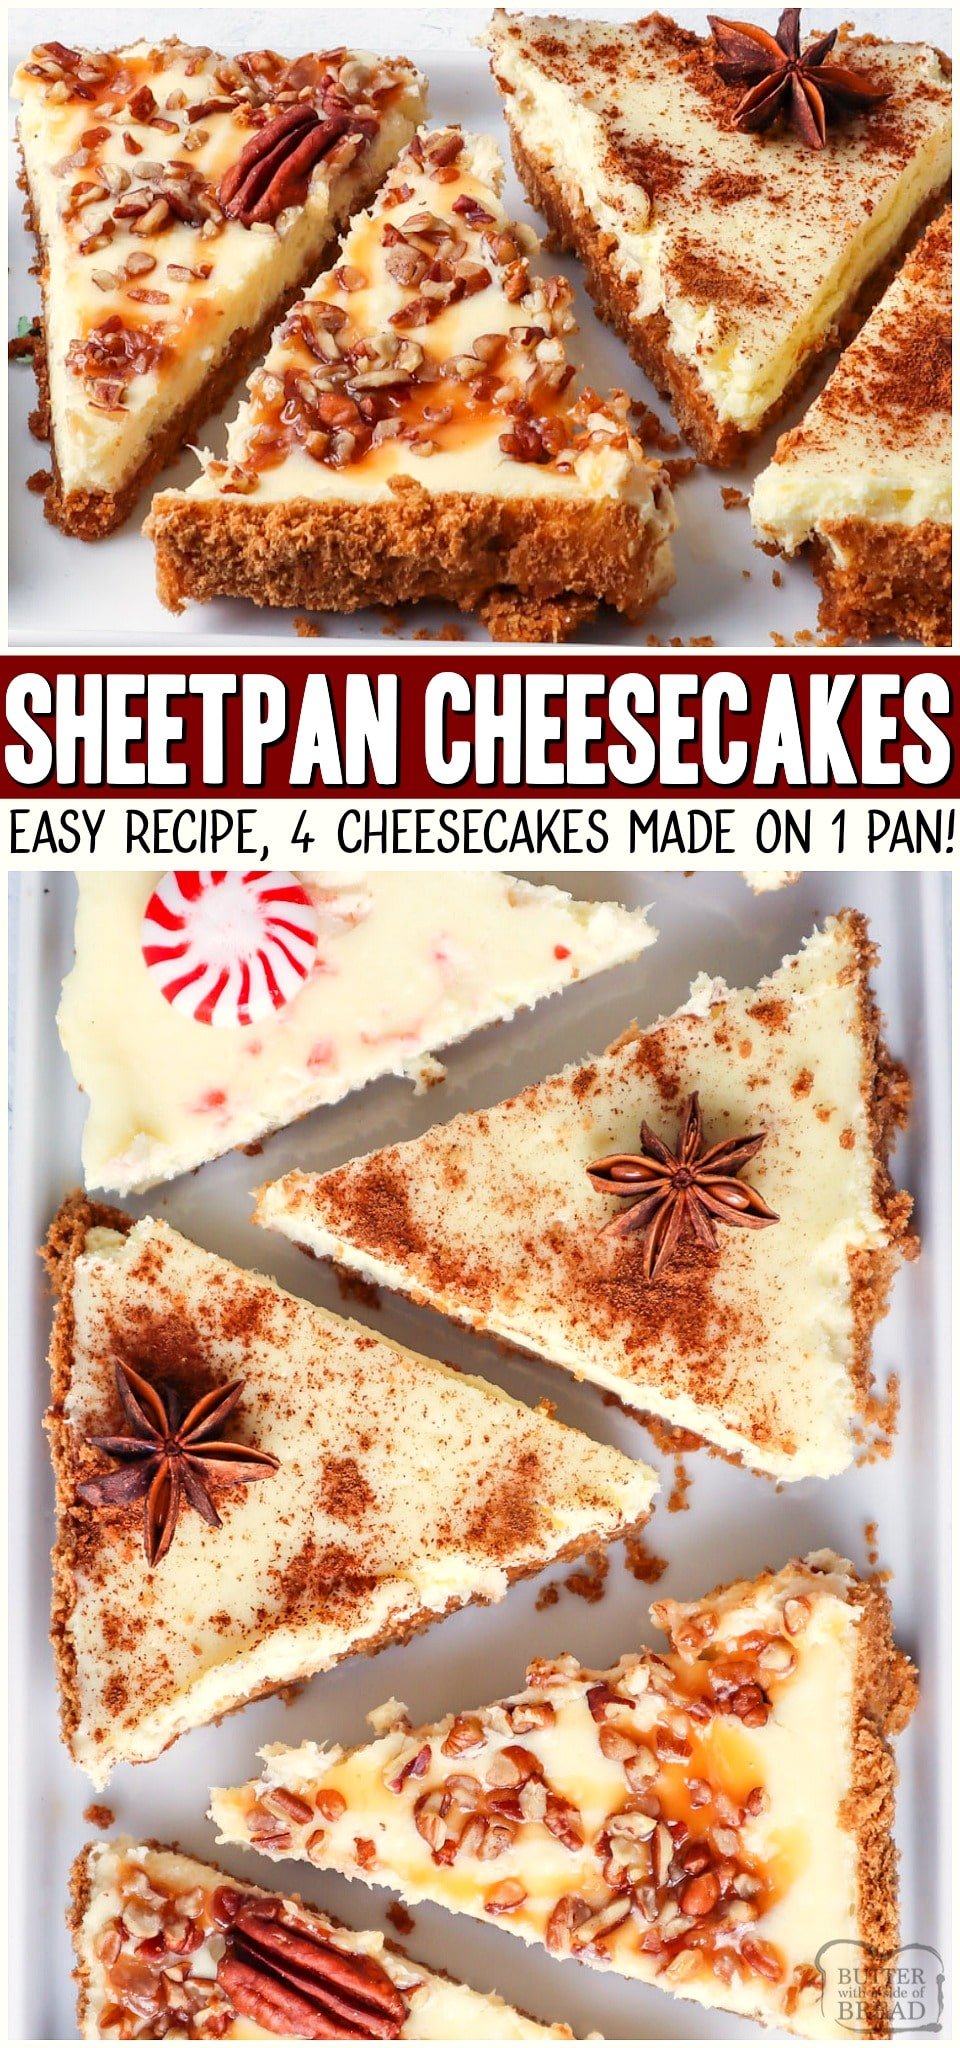 This easy sheet pan cheesecake recipe is one to remember. With just one simple graham cracker crust and a basic cheesecake batter we can create holiday cheesecake bars with 4 flavor options to choose from!   1 sheet pan and 4 delicious flavors of homemade cheesecake made conveniently on a sheet pan. Serve it up at your next holiday party and watch them disappear!